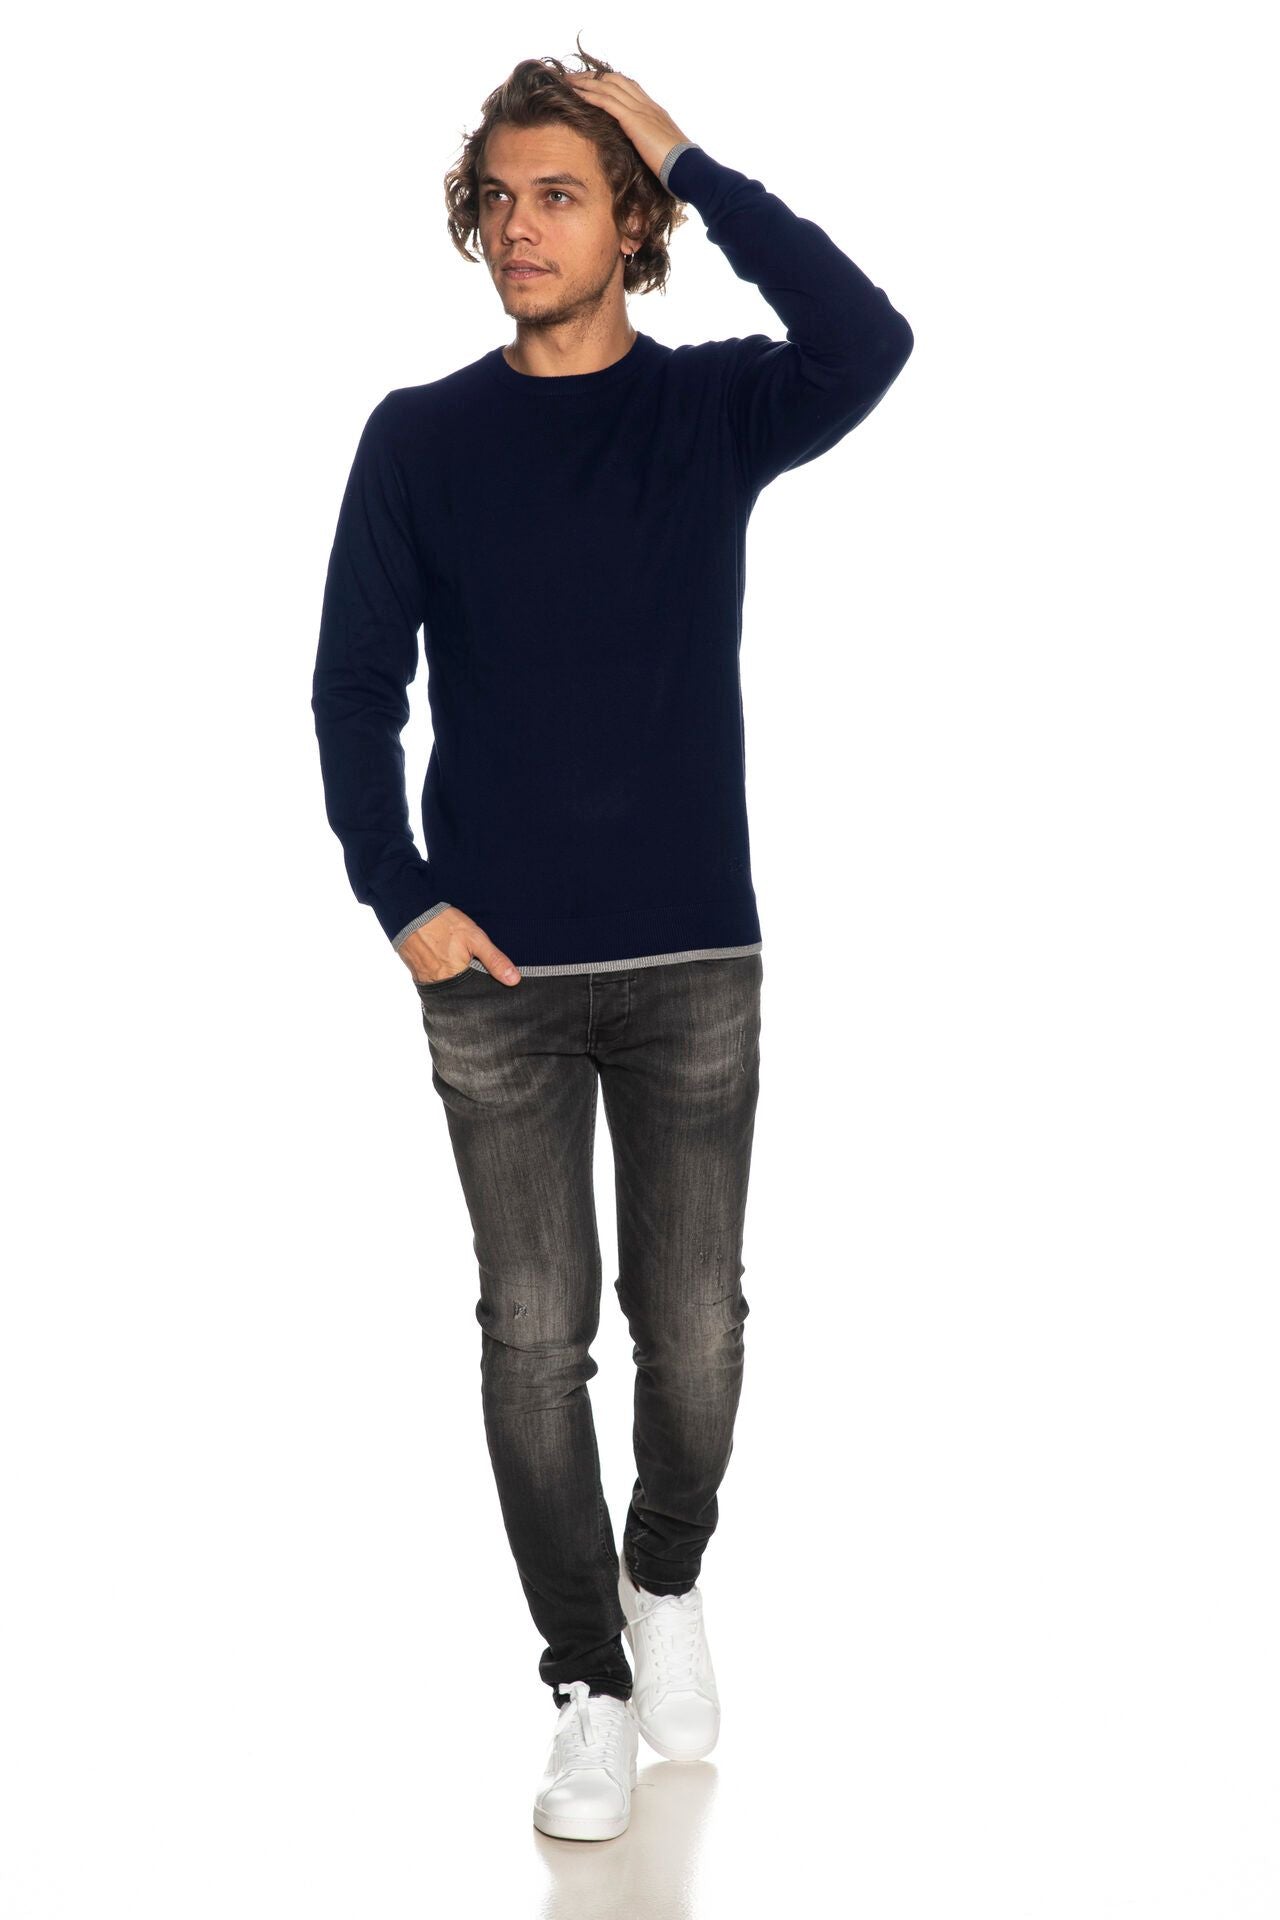 Elegant Crewneck Sweater with Elbow Patches